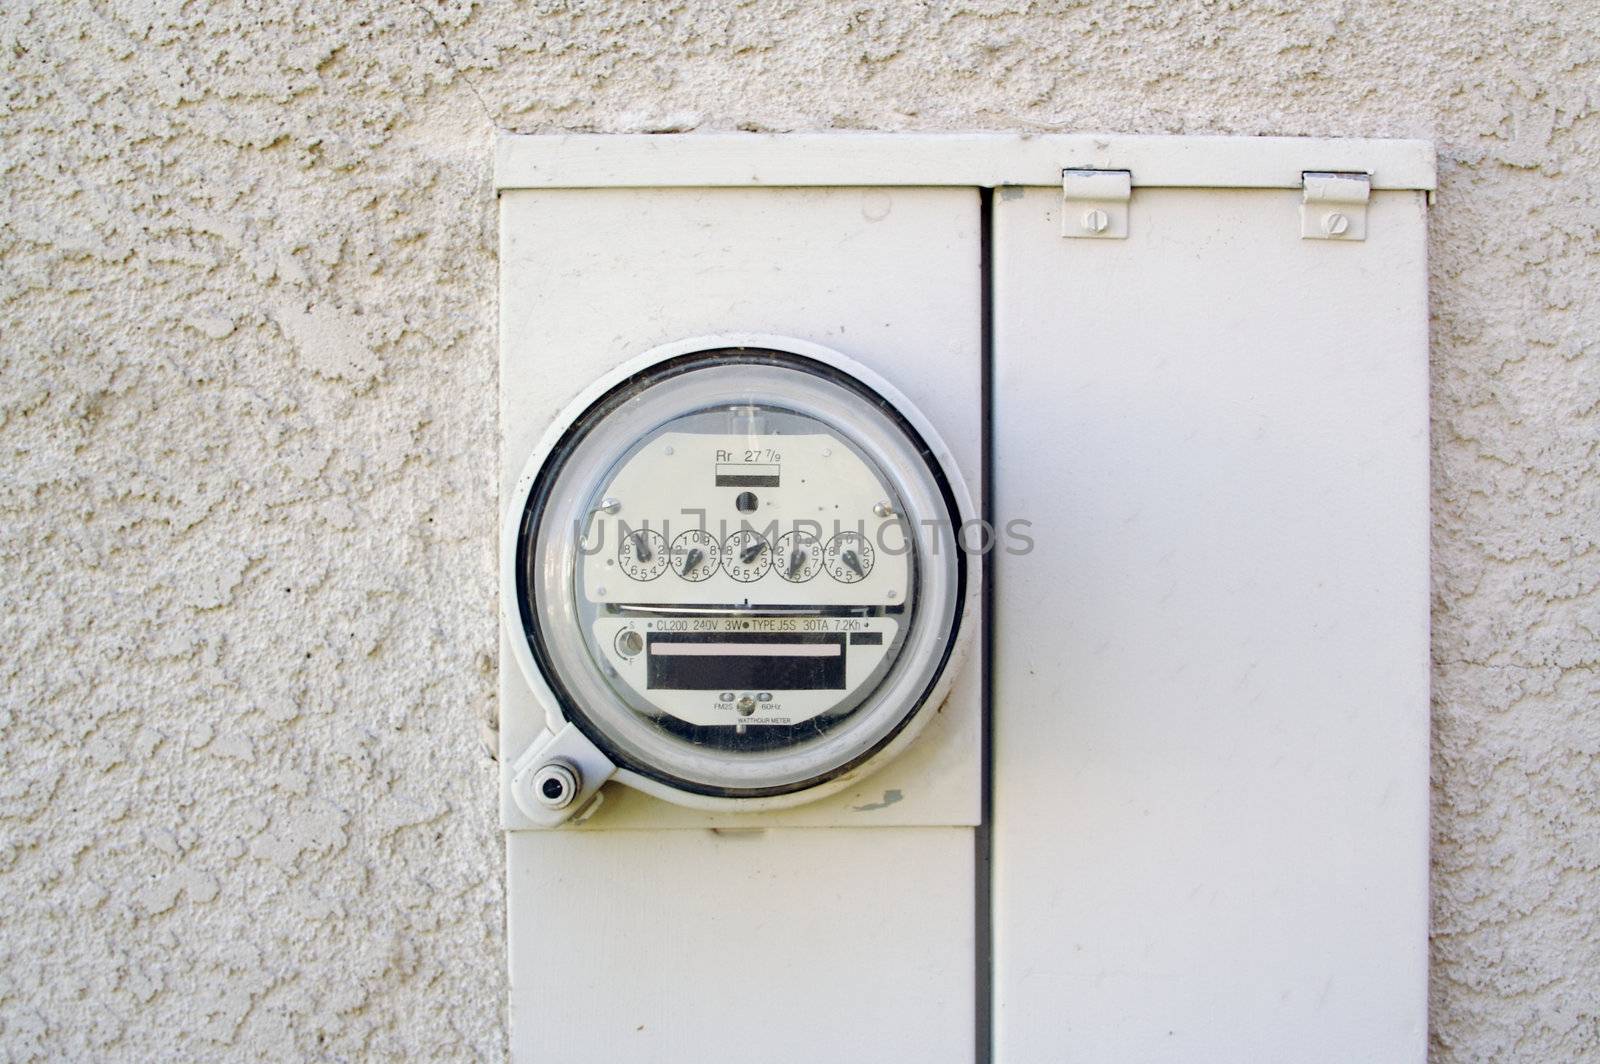 Electric Meter on Outside Stucco Wall